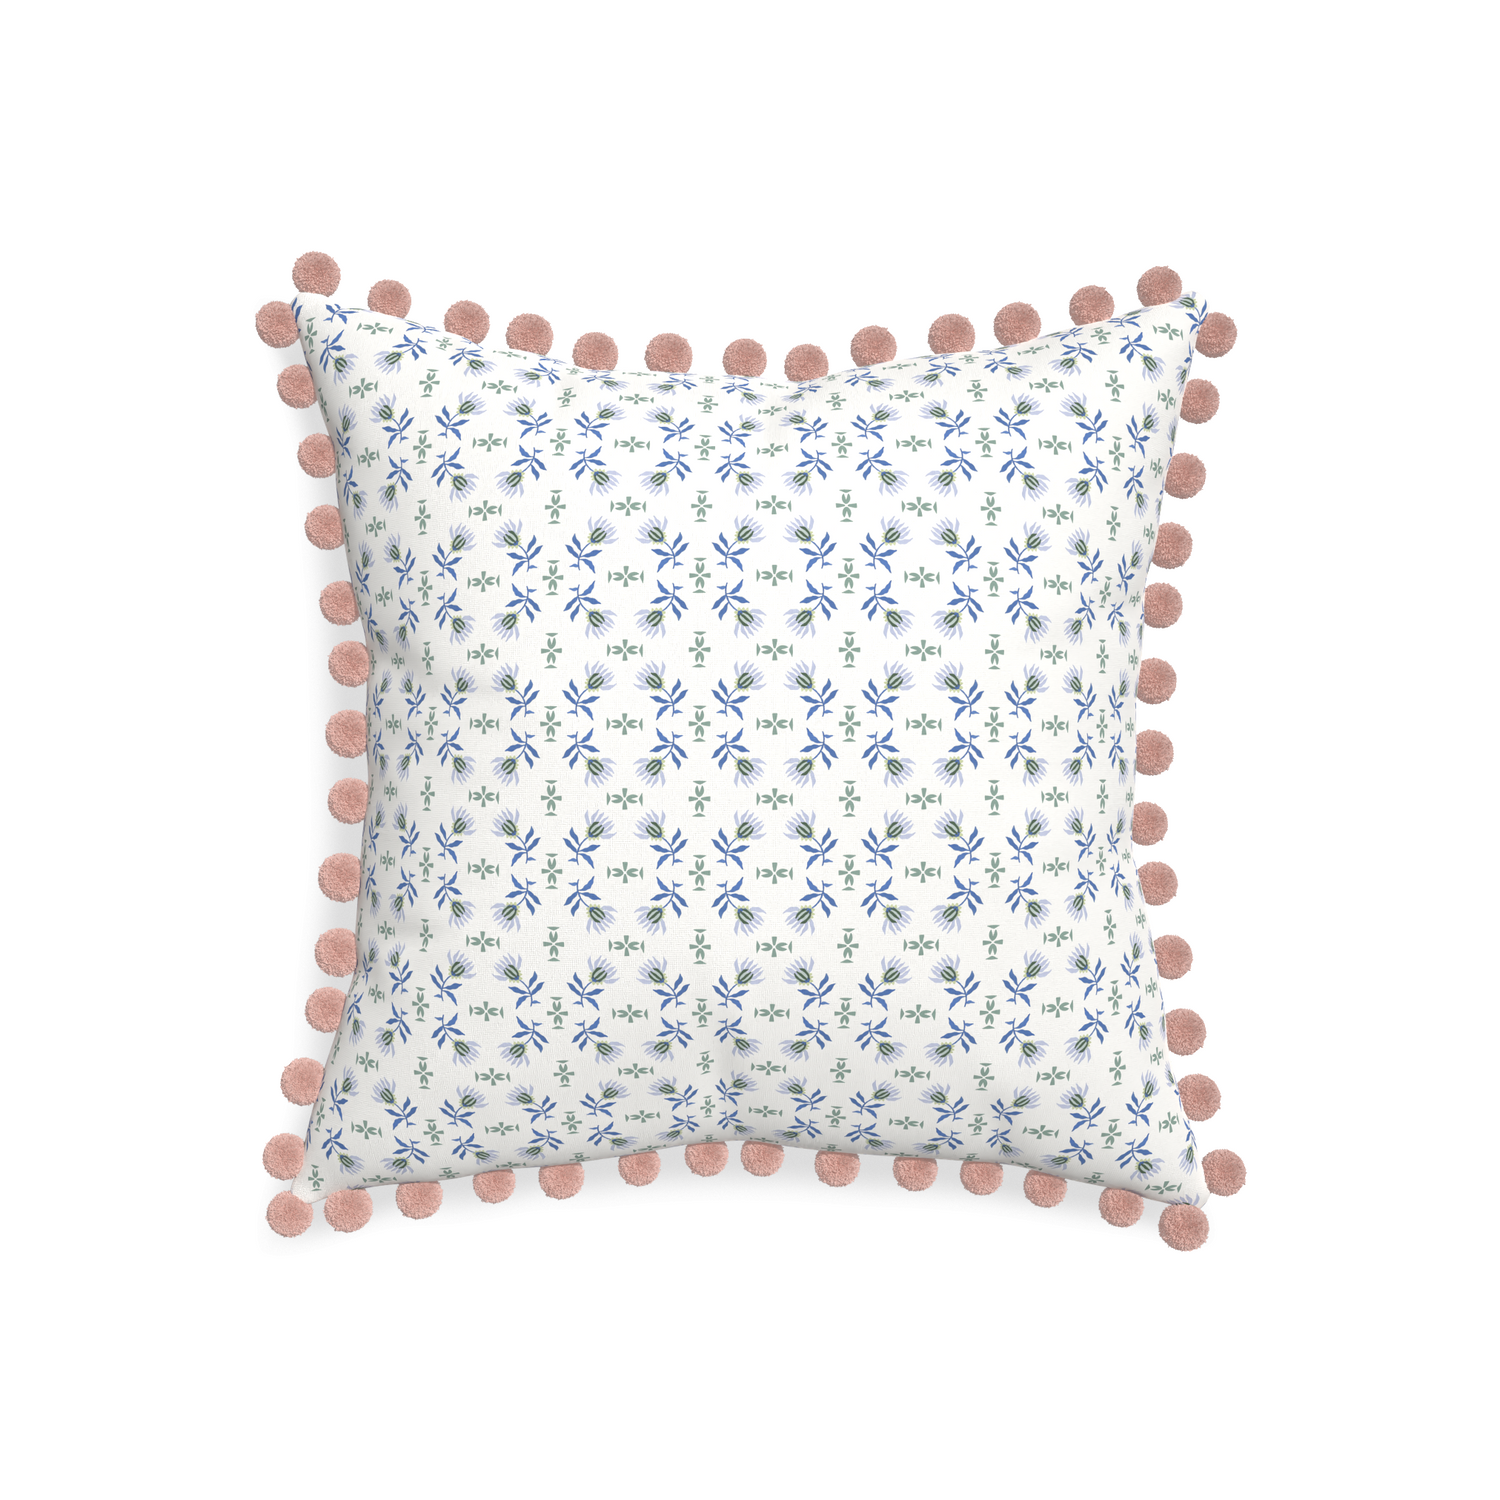 20-square lee custom blue & green floralpillow with rose pom pom on white background